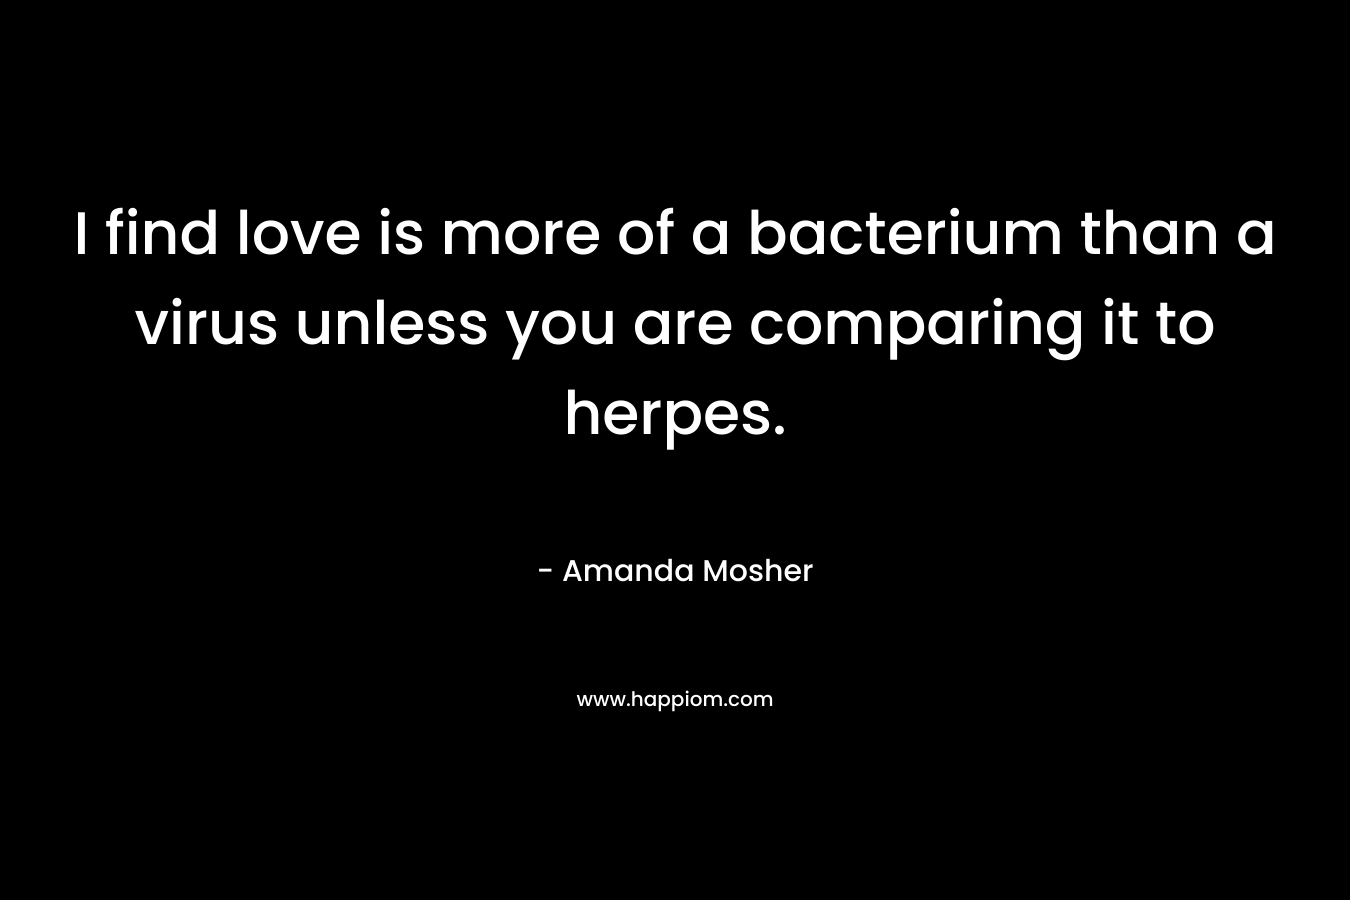 I find love is more of a bacterium than a virus unless you are comparing it to herpes. – Amanda Mosher